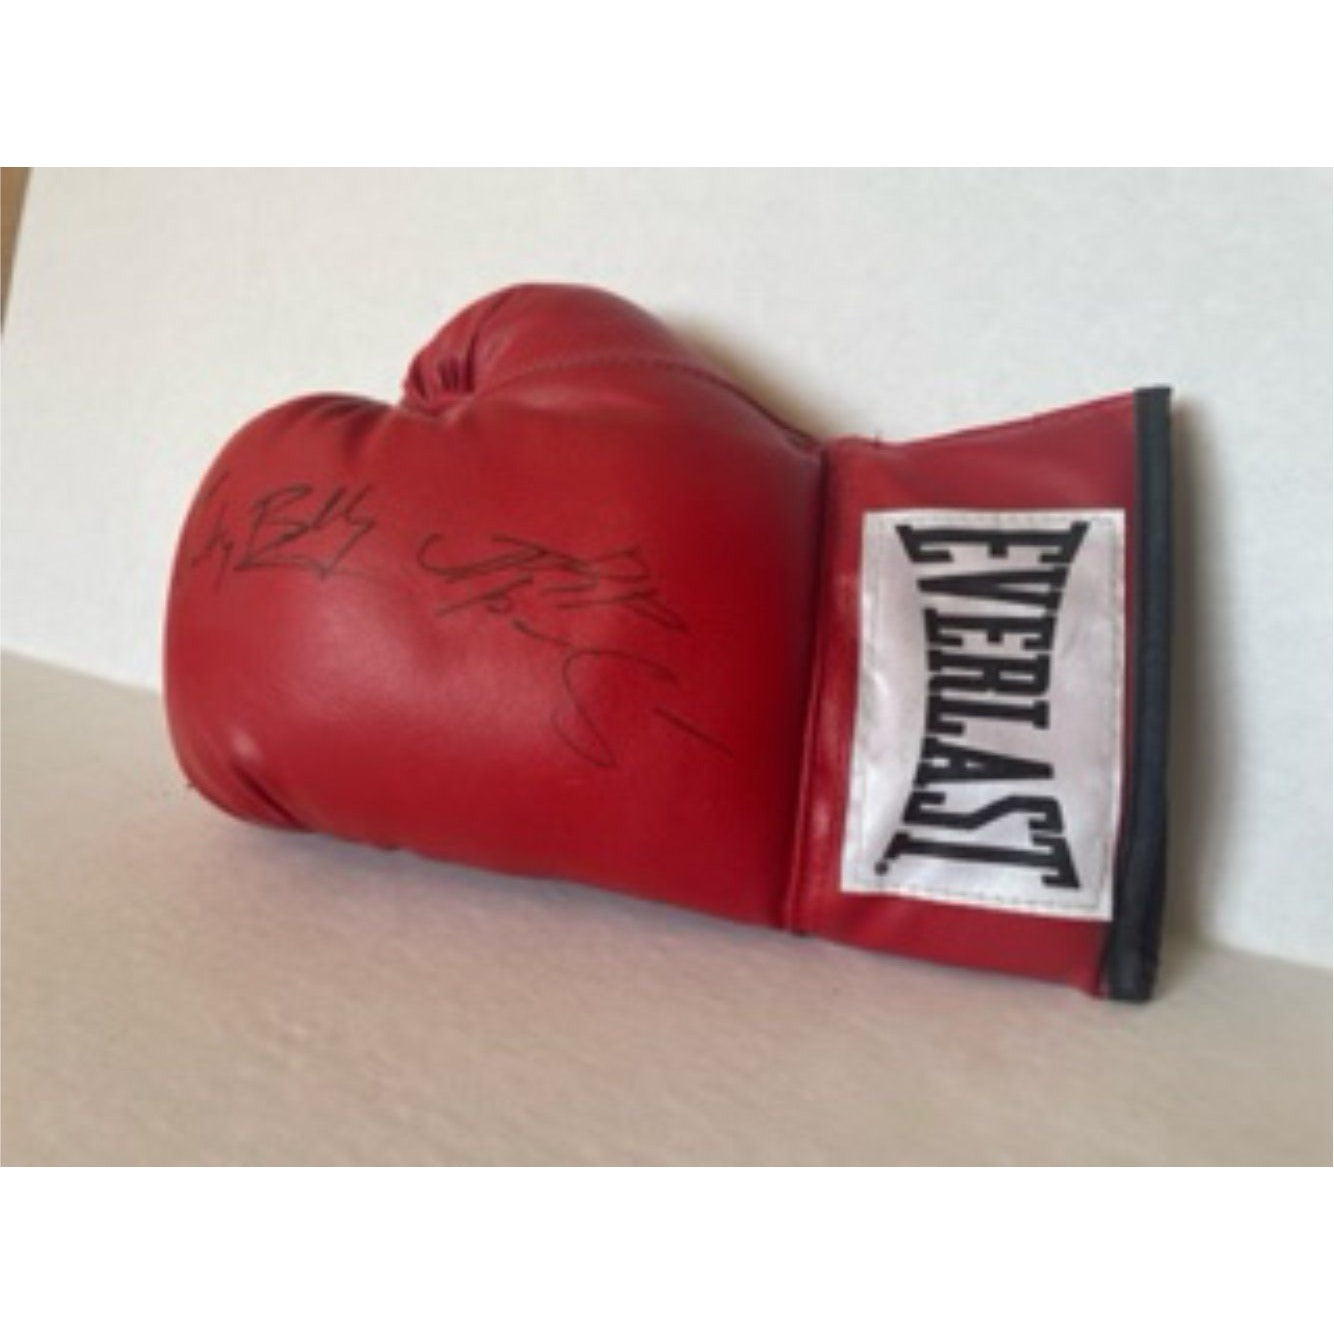 Timothy Bradley Ruslan  Provodnikov Everlast leather boxing glove signed with proof